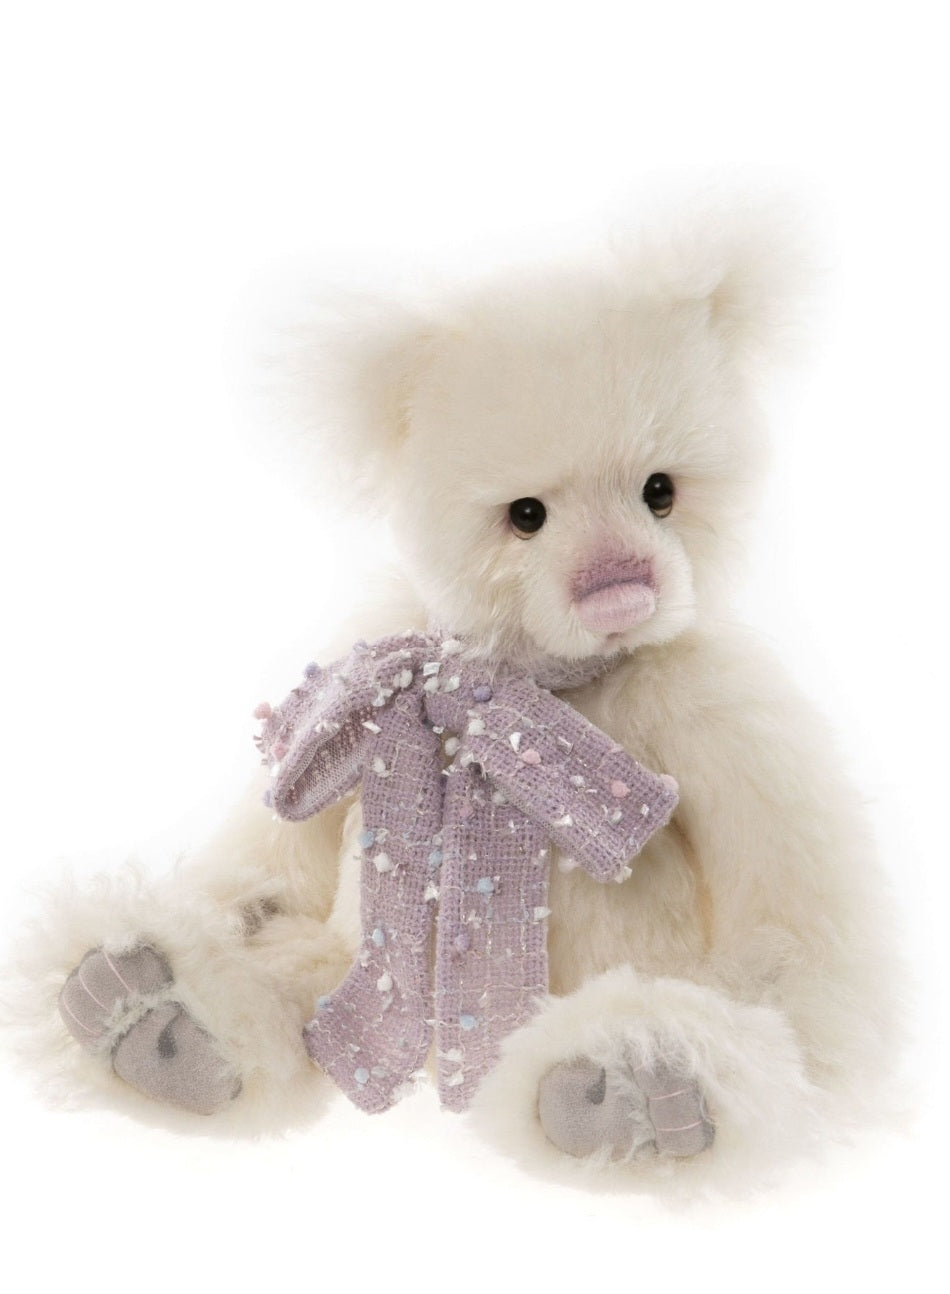 Celine - 16" Mohair Bear - Isabelle Collection - Only 275 Made!